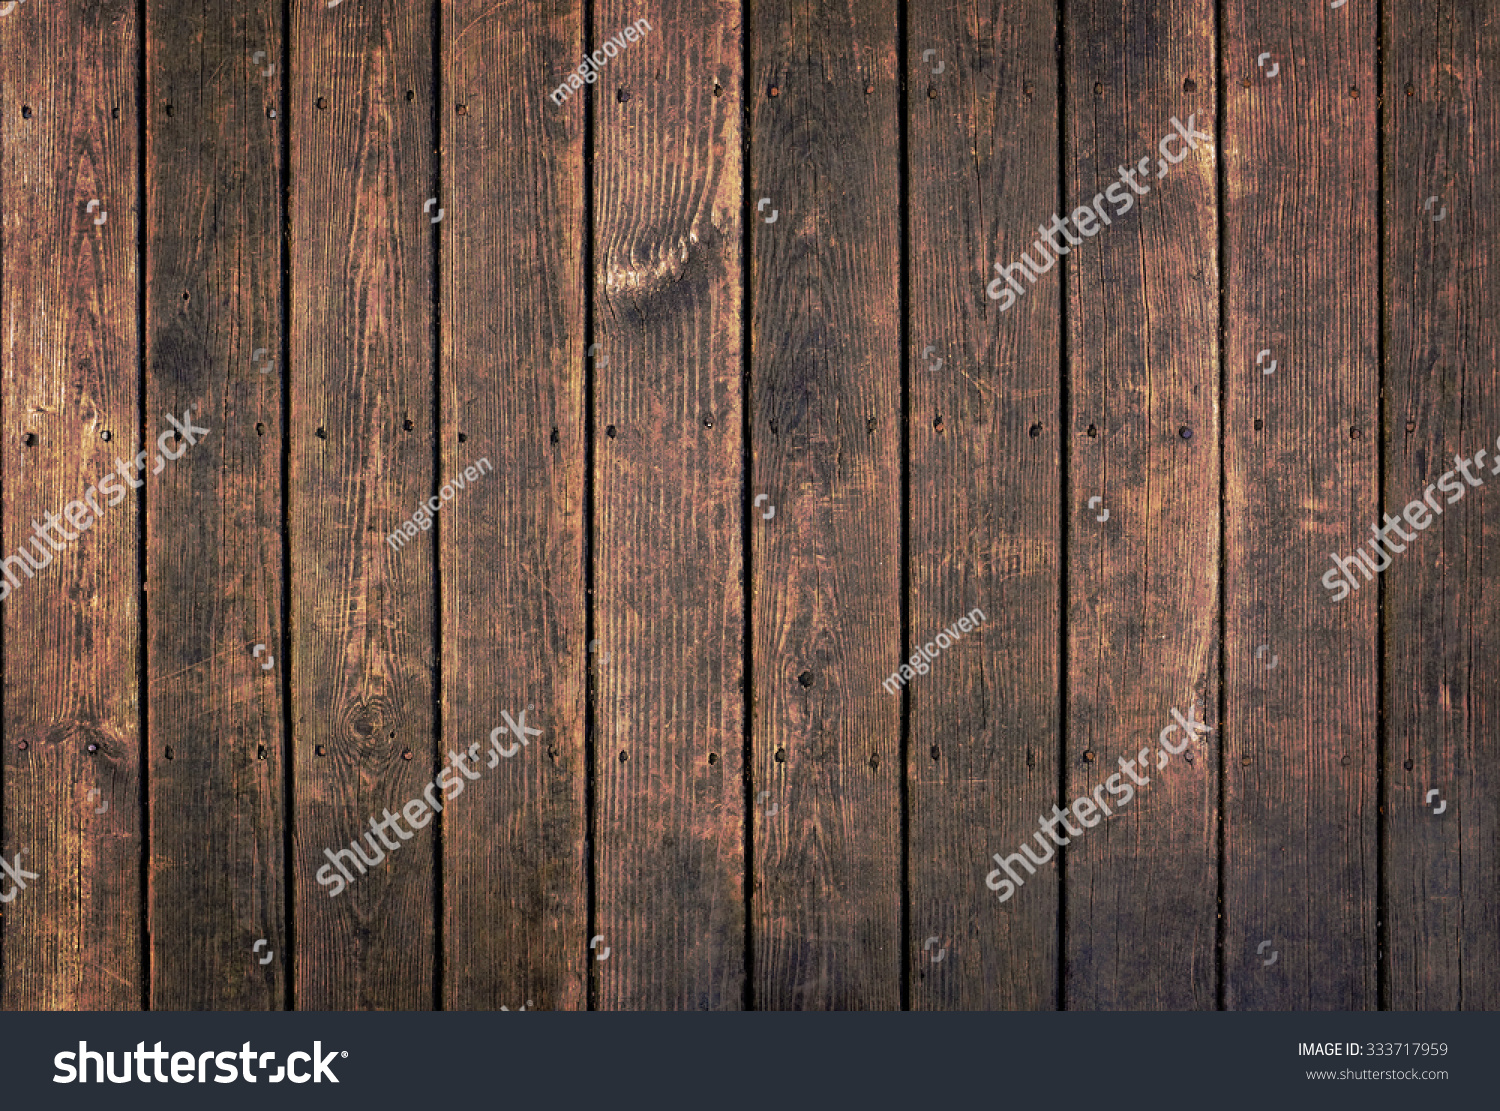 Wood plank texture for background #333717959